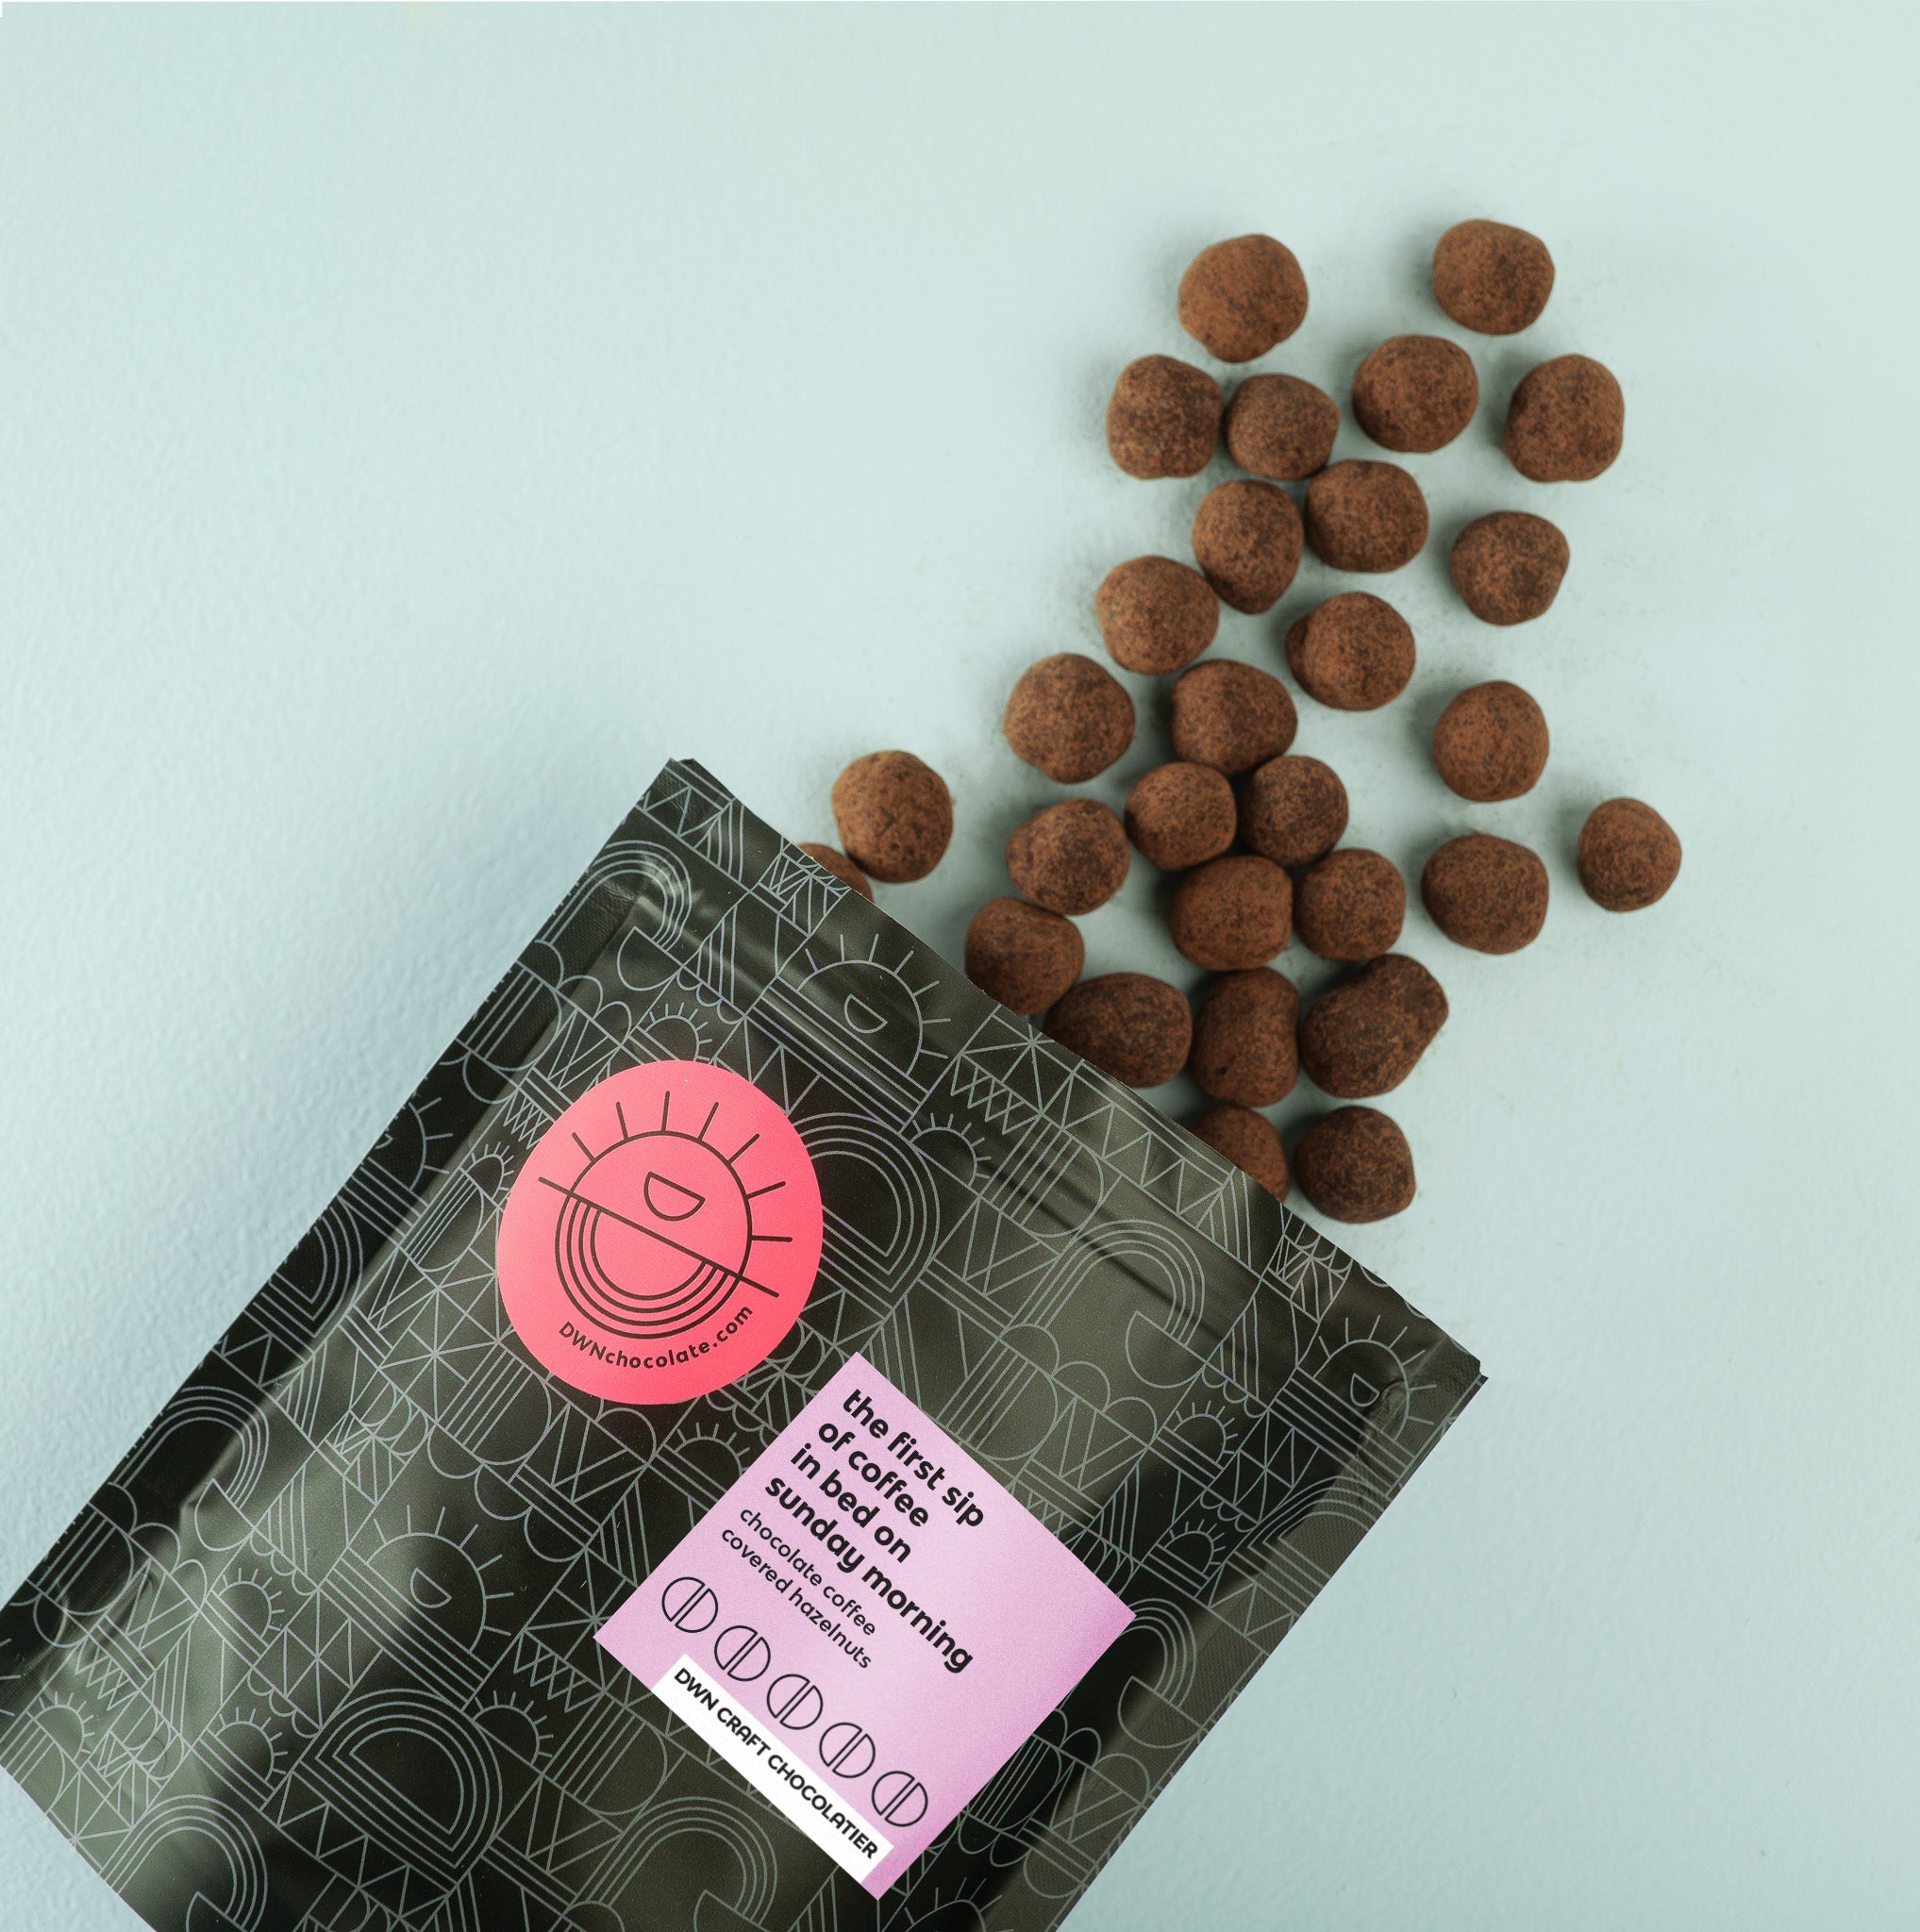 a pouch of chocolate-coffee hazelnuts fall out of the packaging onto a blue background